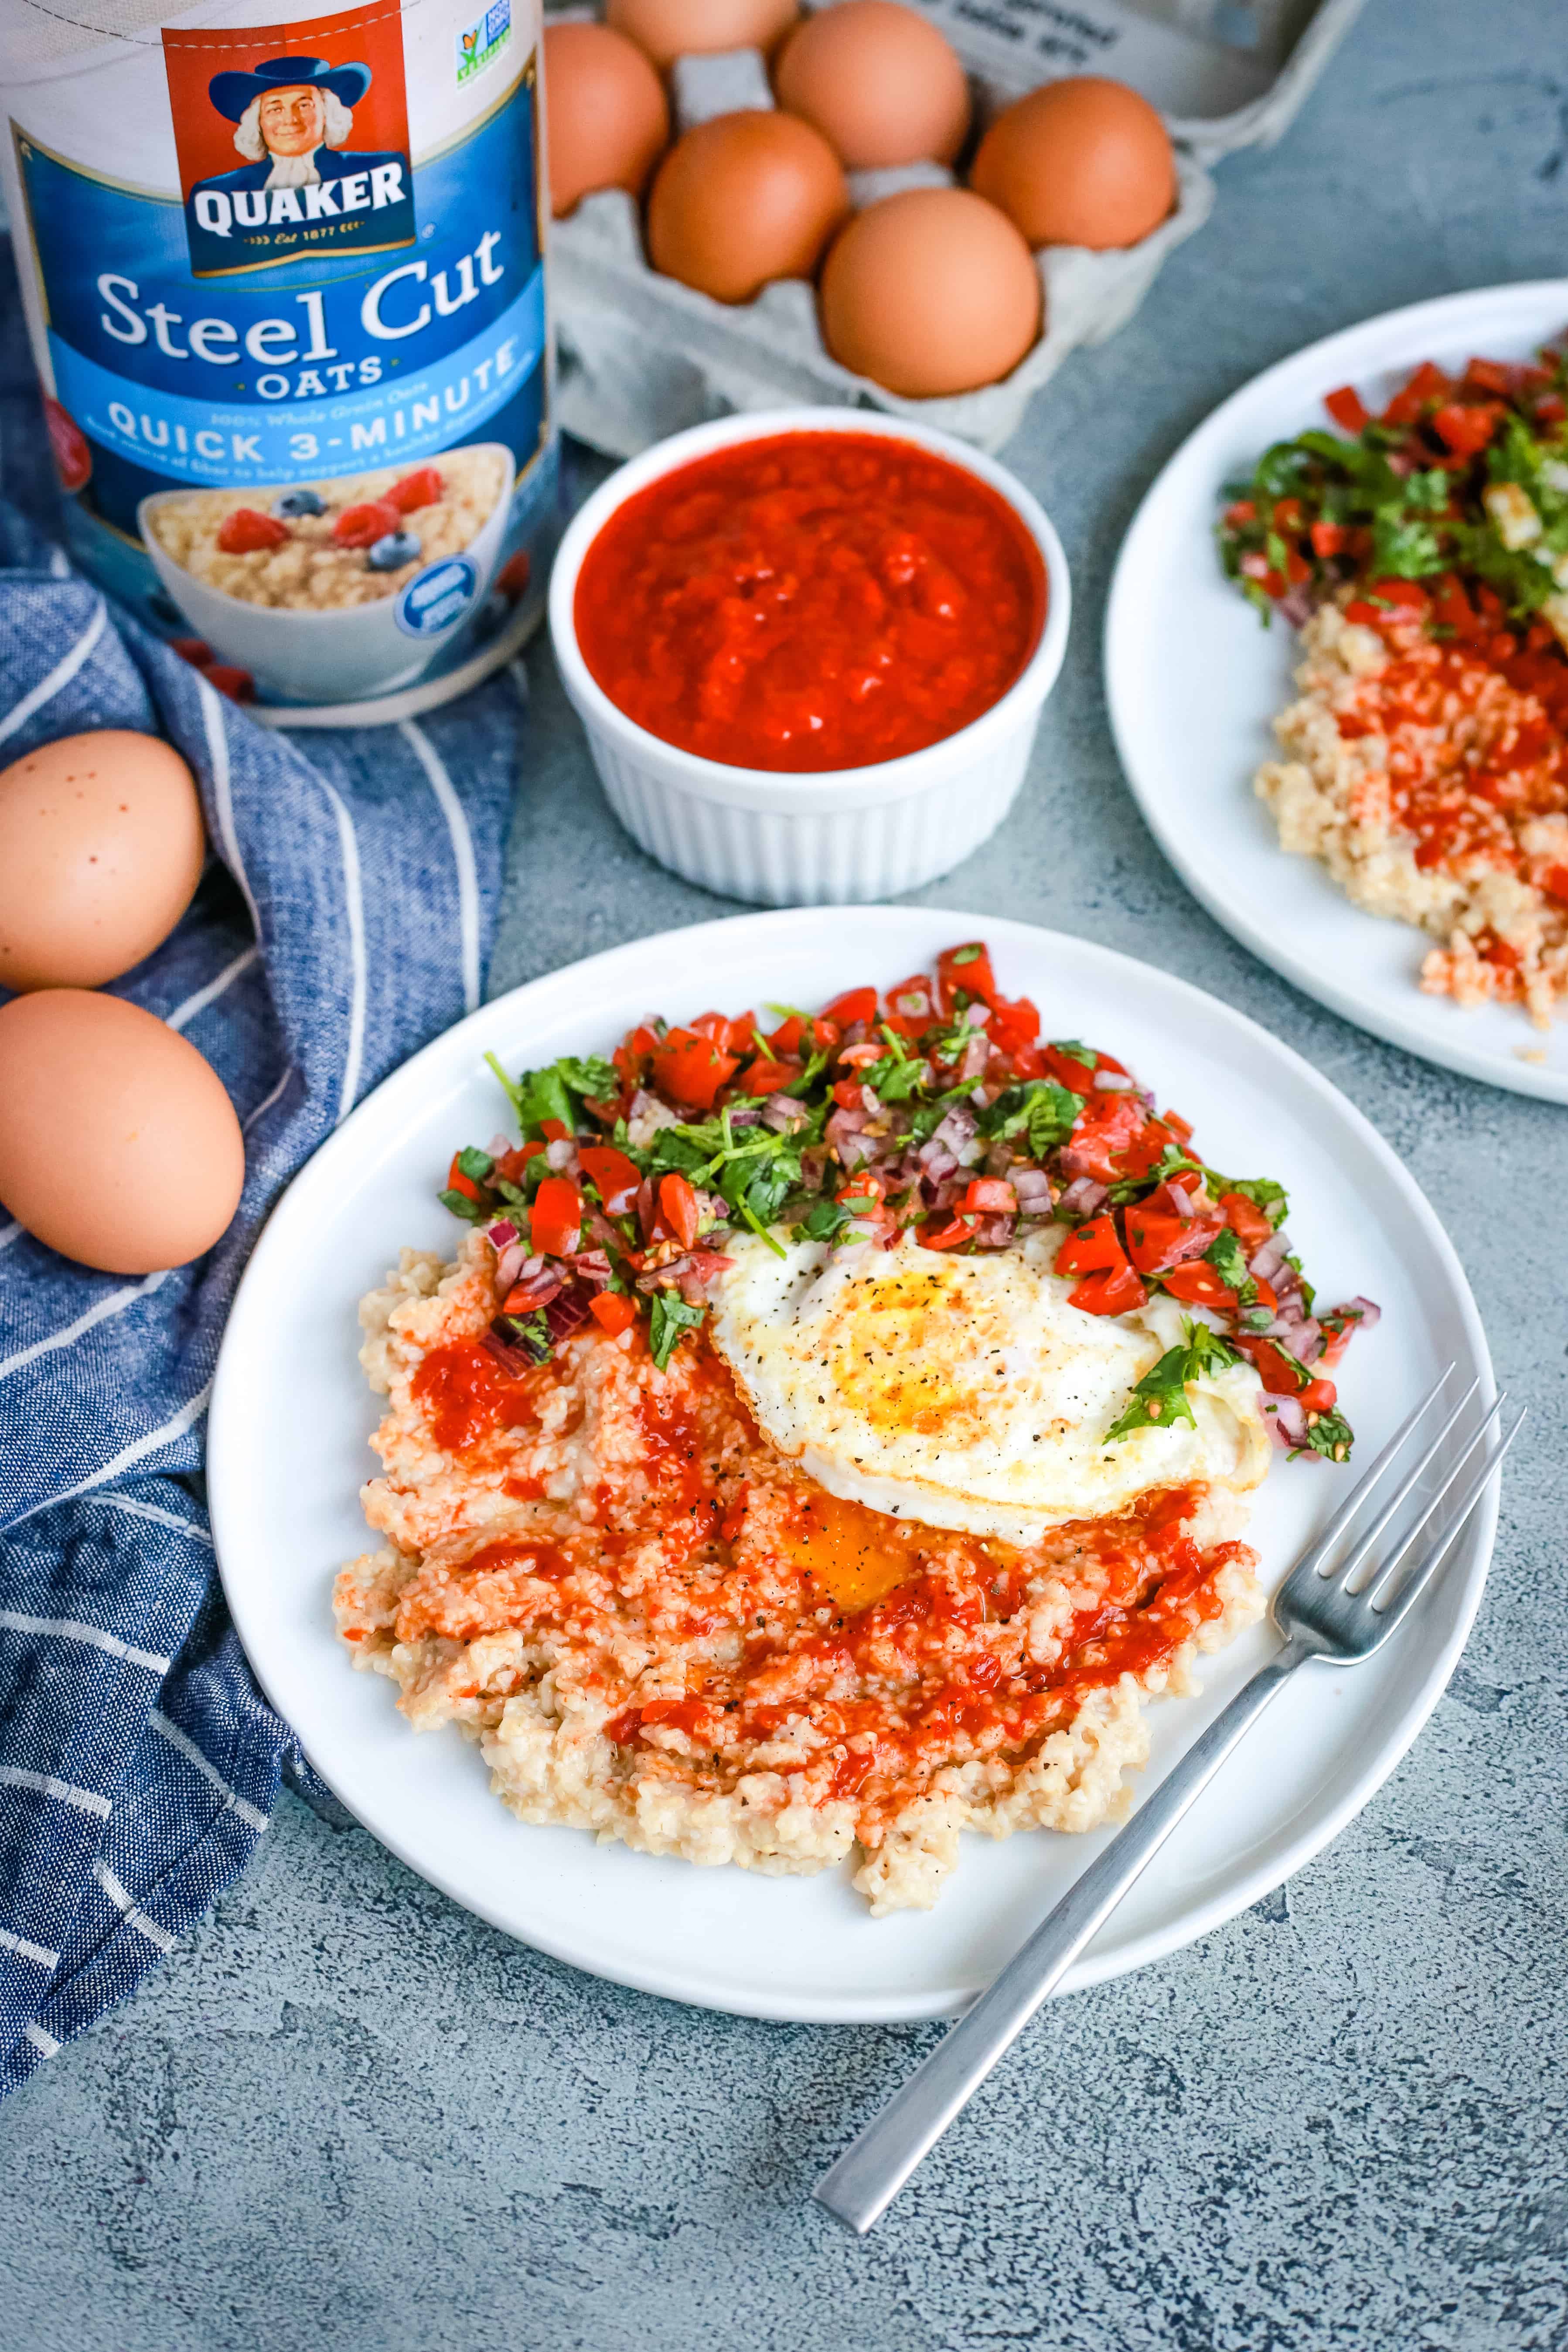 Spicy Harissa Oatmeal with Eggs and Quaker Steel Cut Oats